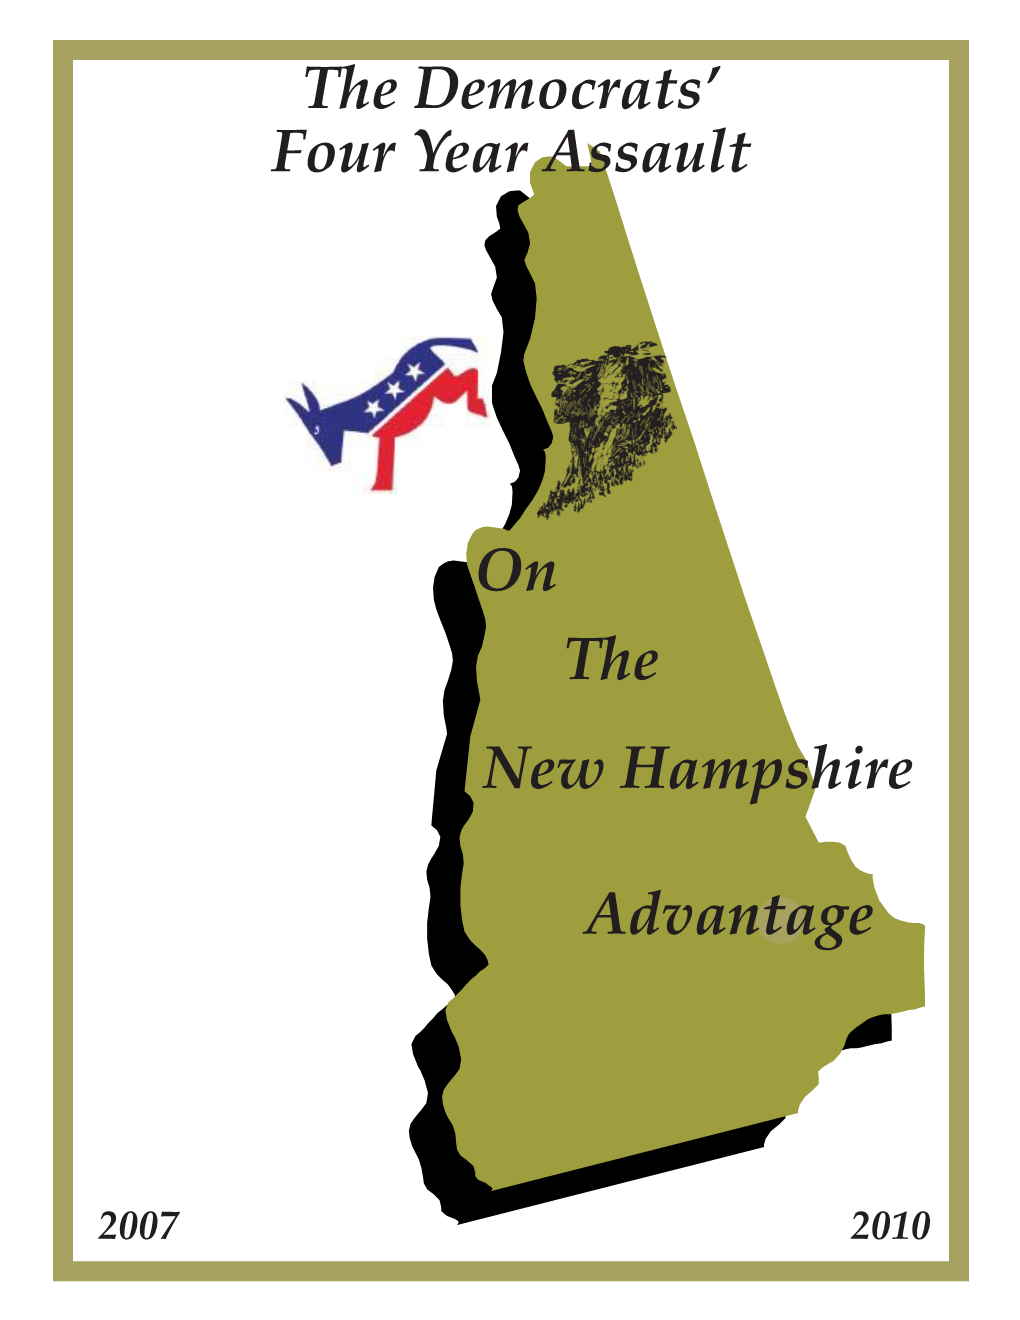 The Democrats' Four Year Assault on Advantage the New Hampshire